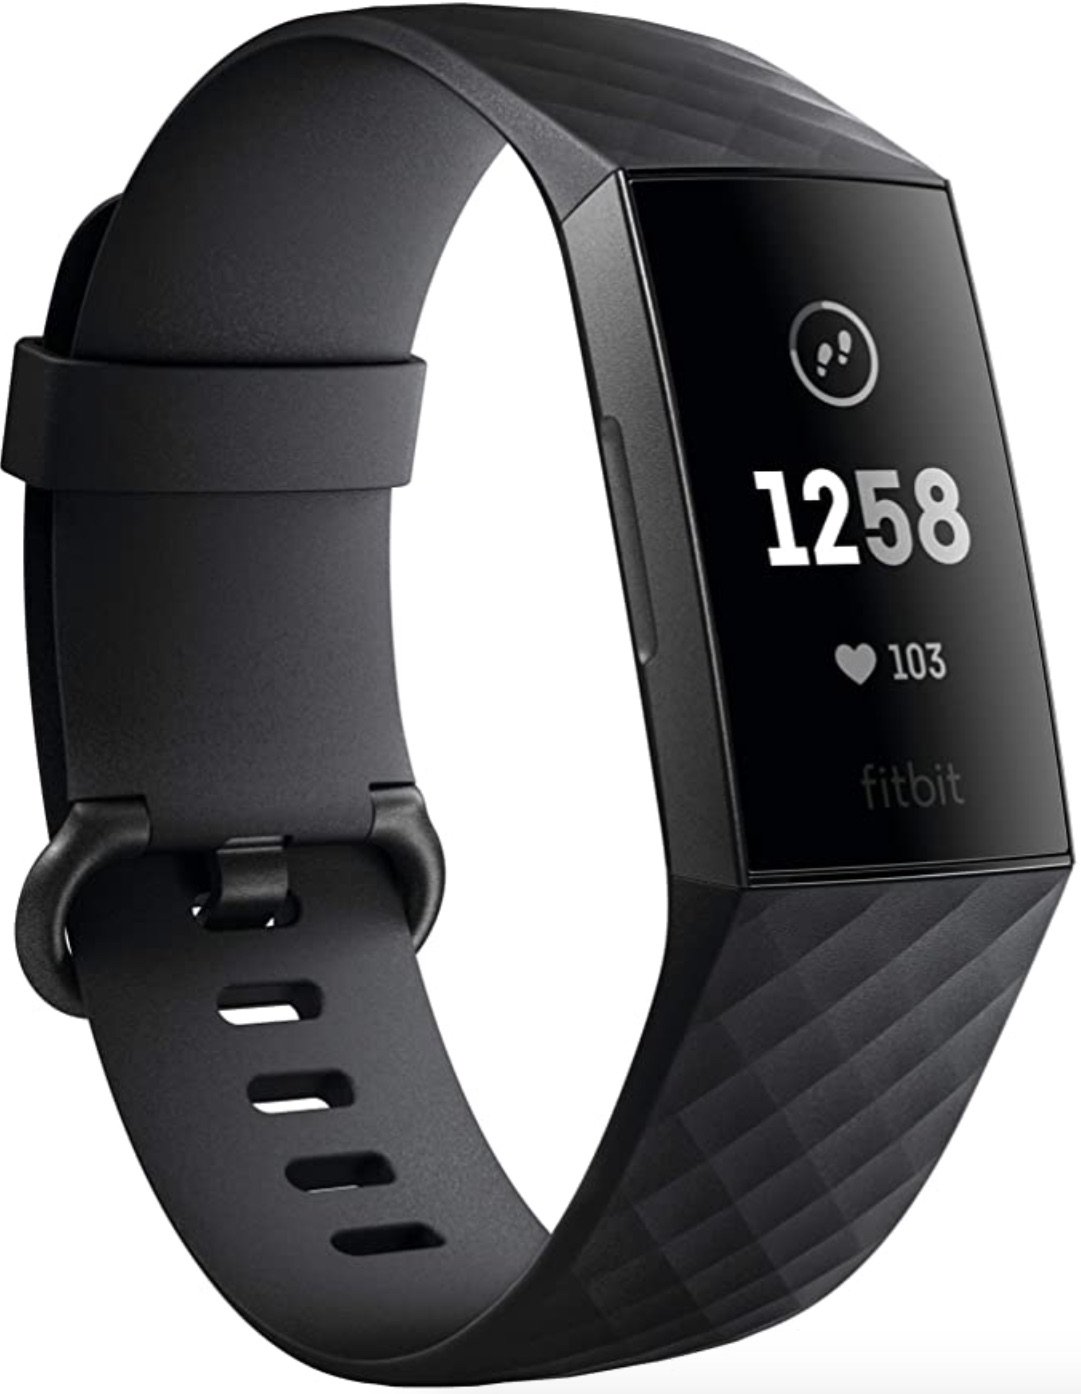 what's the difference between fitbit charge 3 and 4